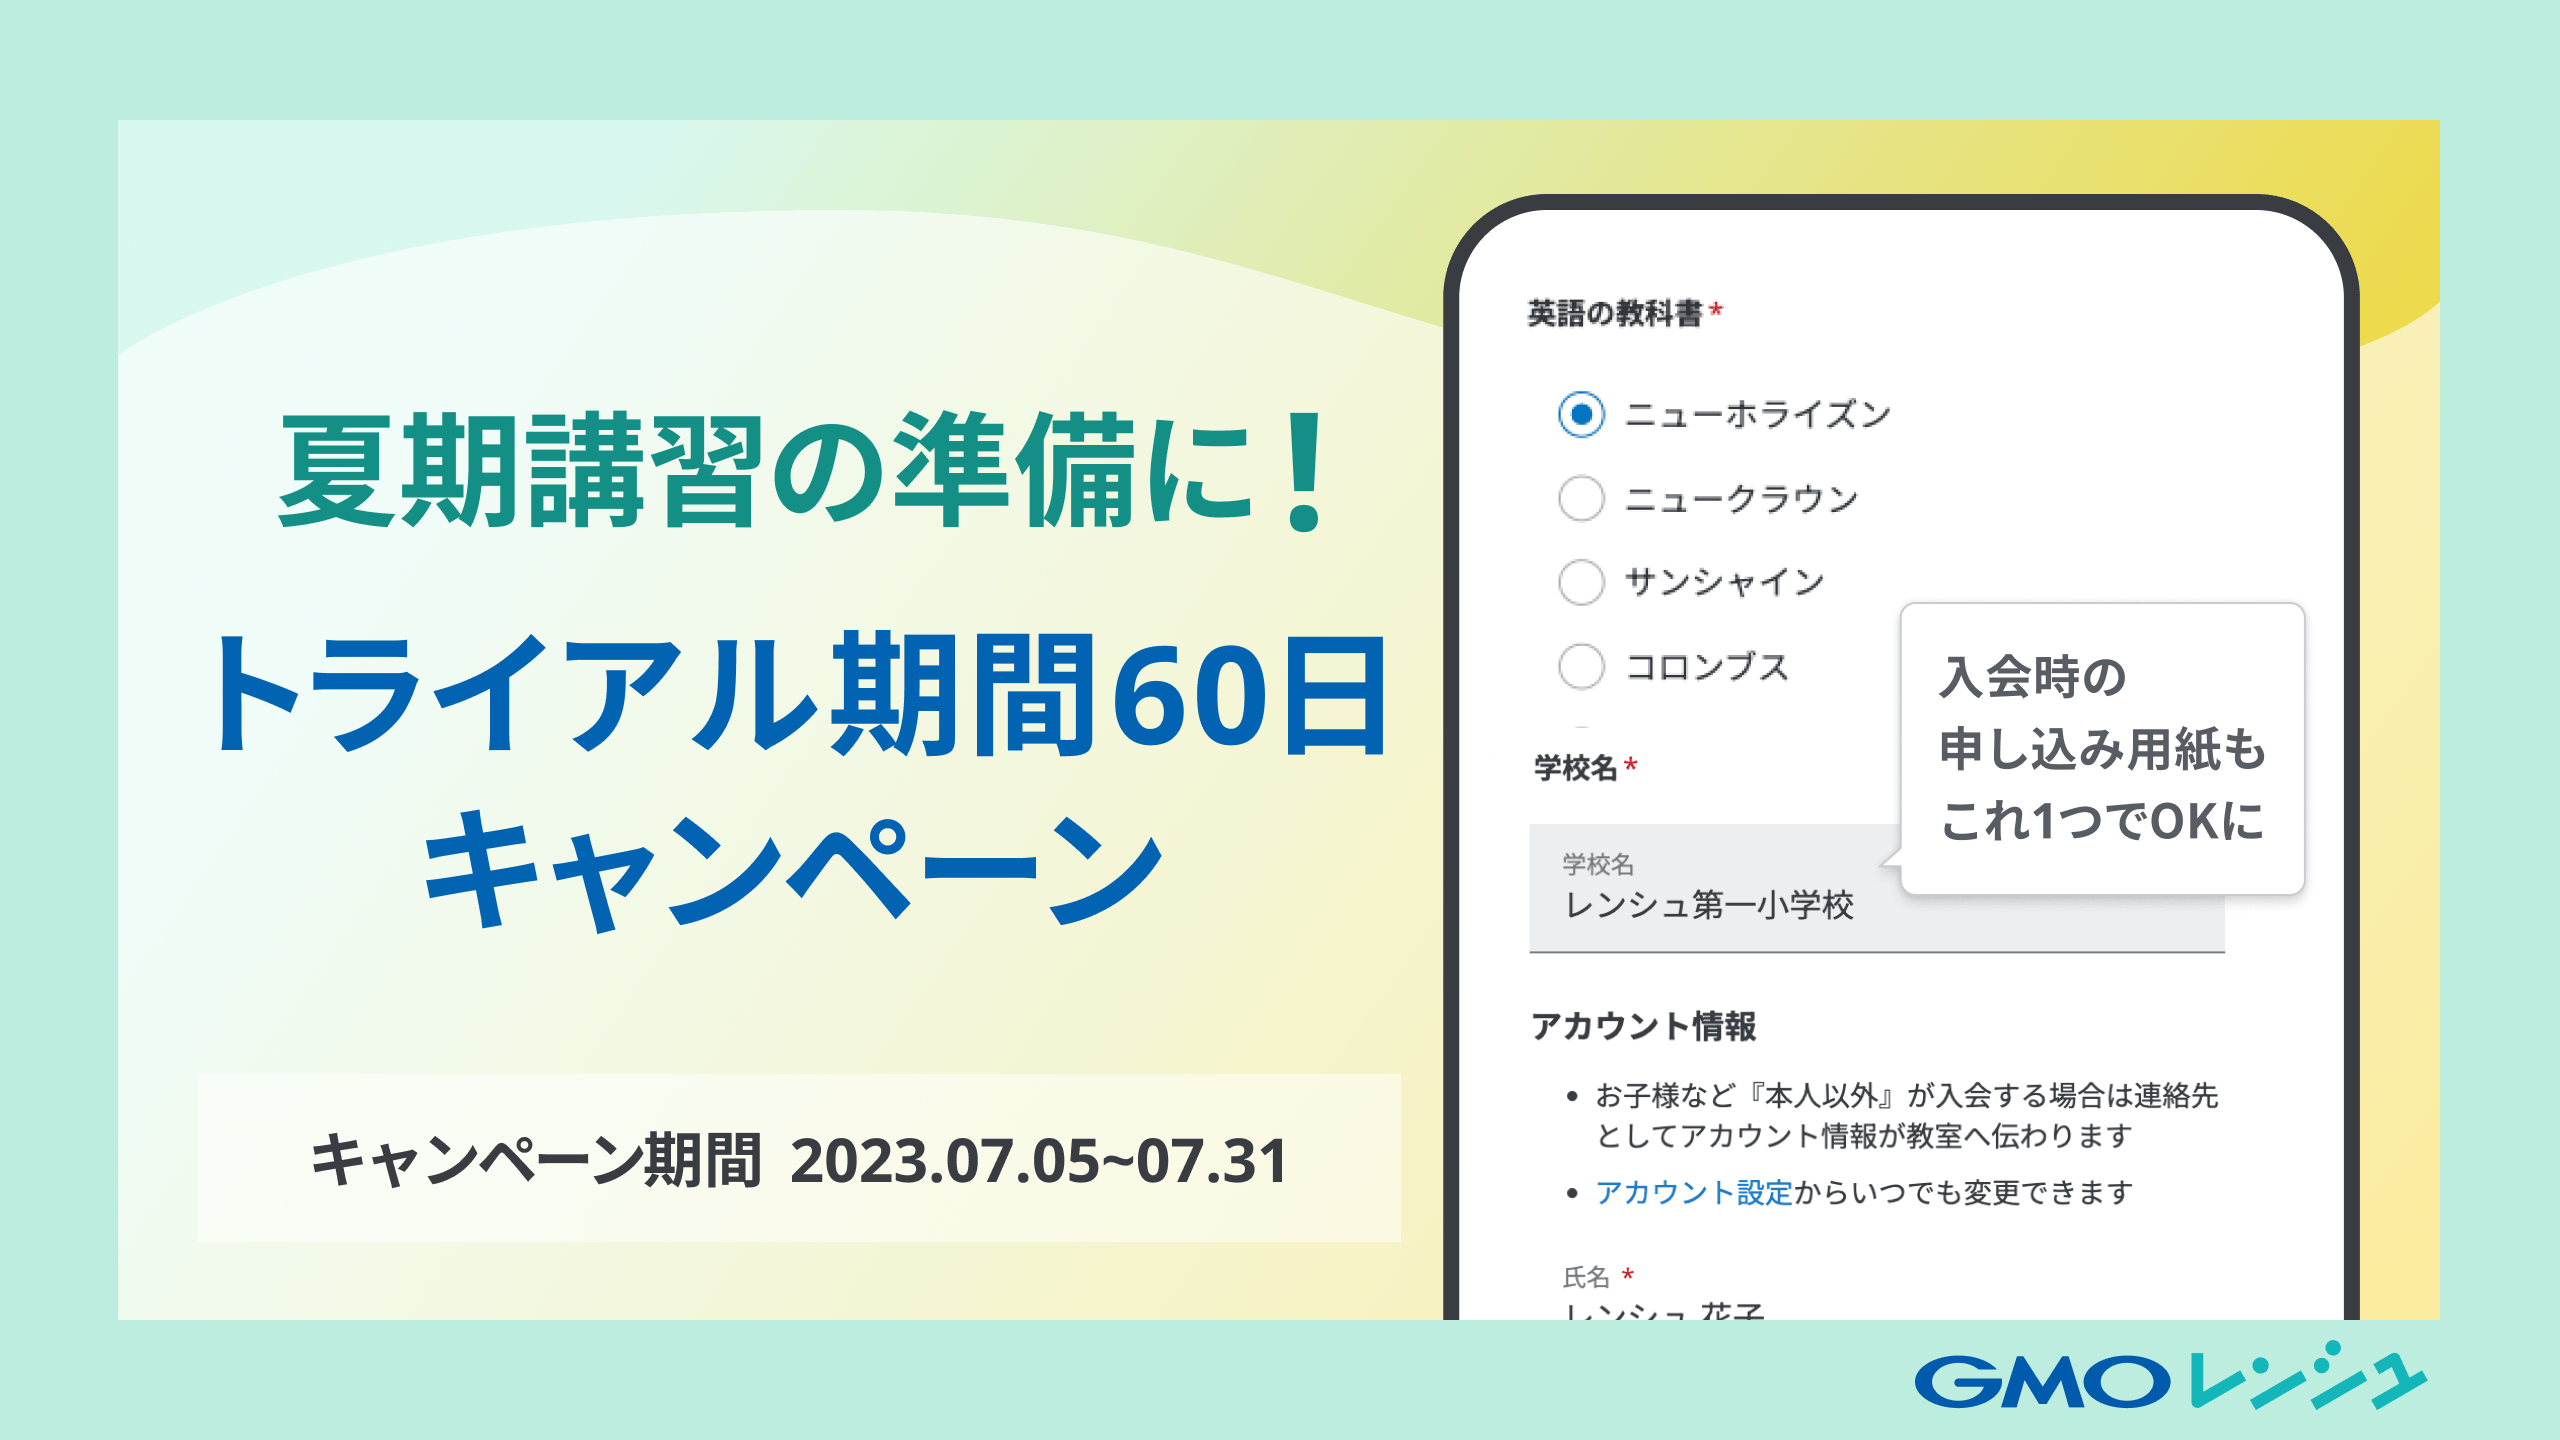 20230705-SummerCampaign.png